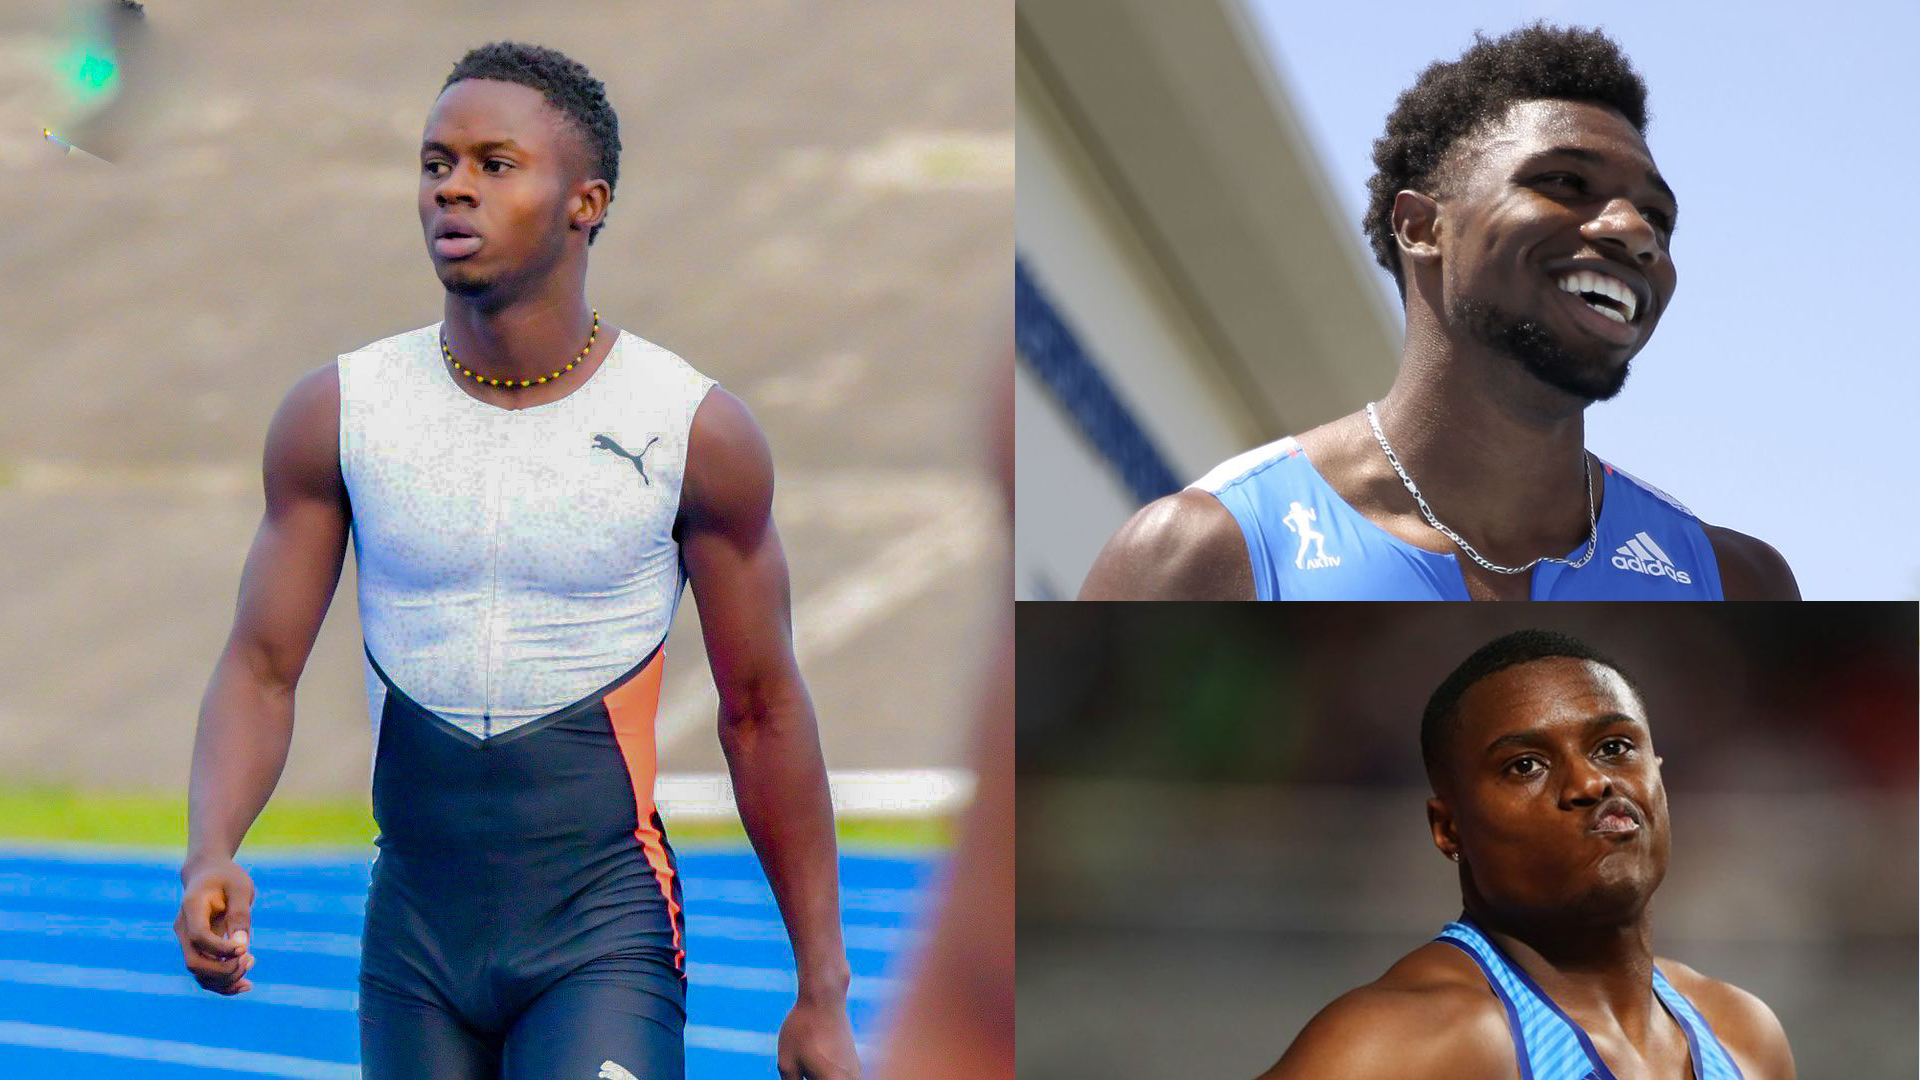 Jamaican Akeem Blake takes on Americans Noah Lyles and Christian Coleman over 60m dash at Millrose Games on Saturday, February 11, 2023